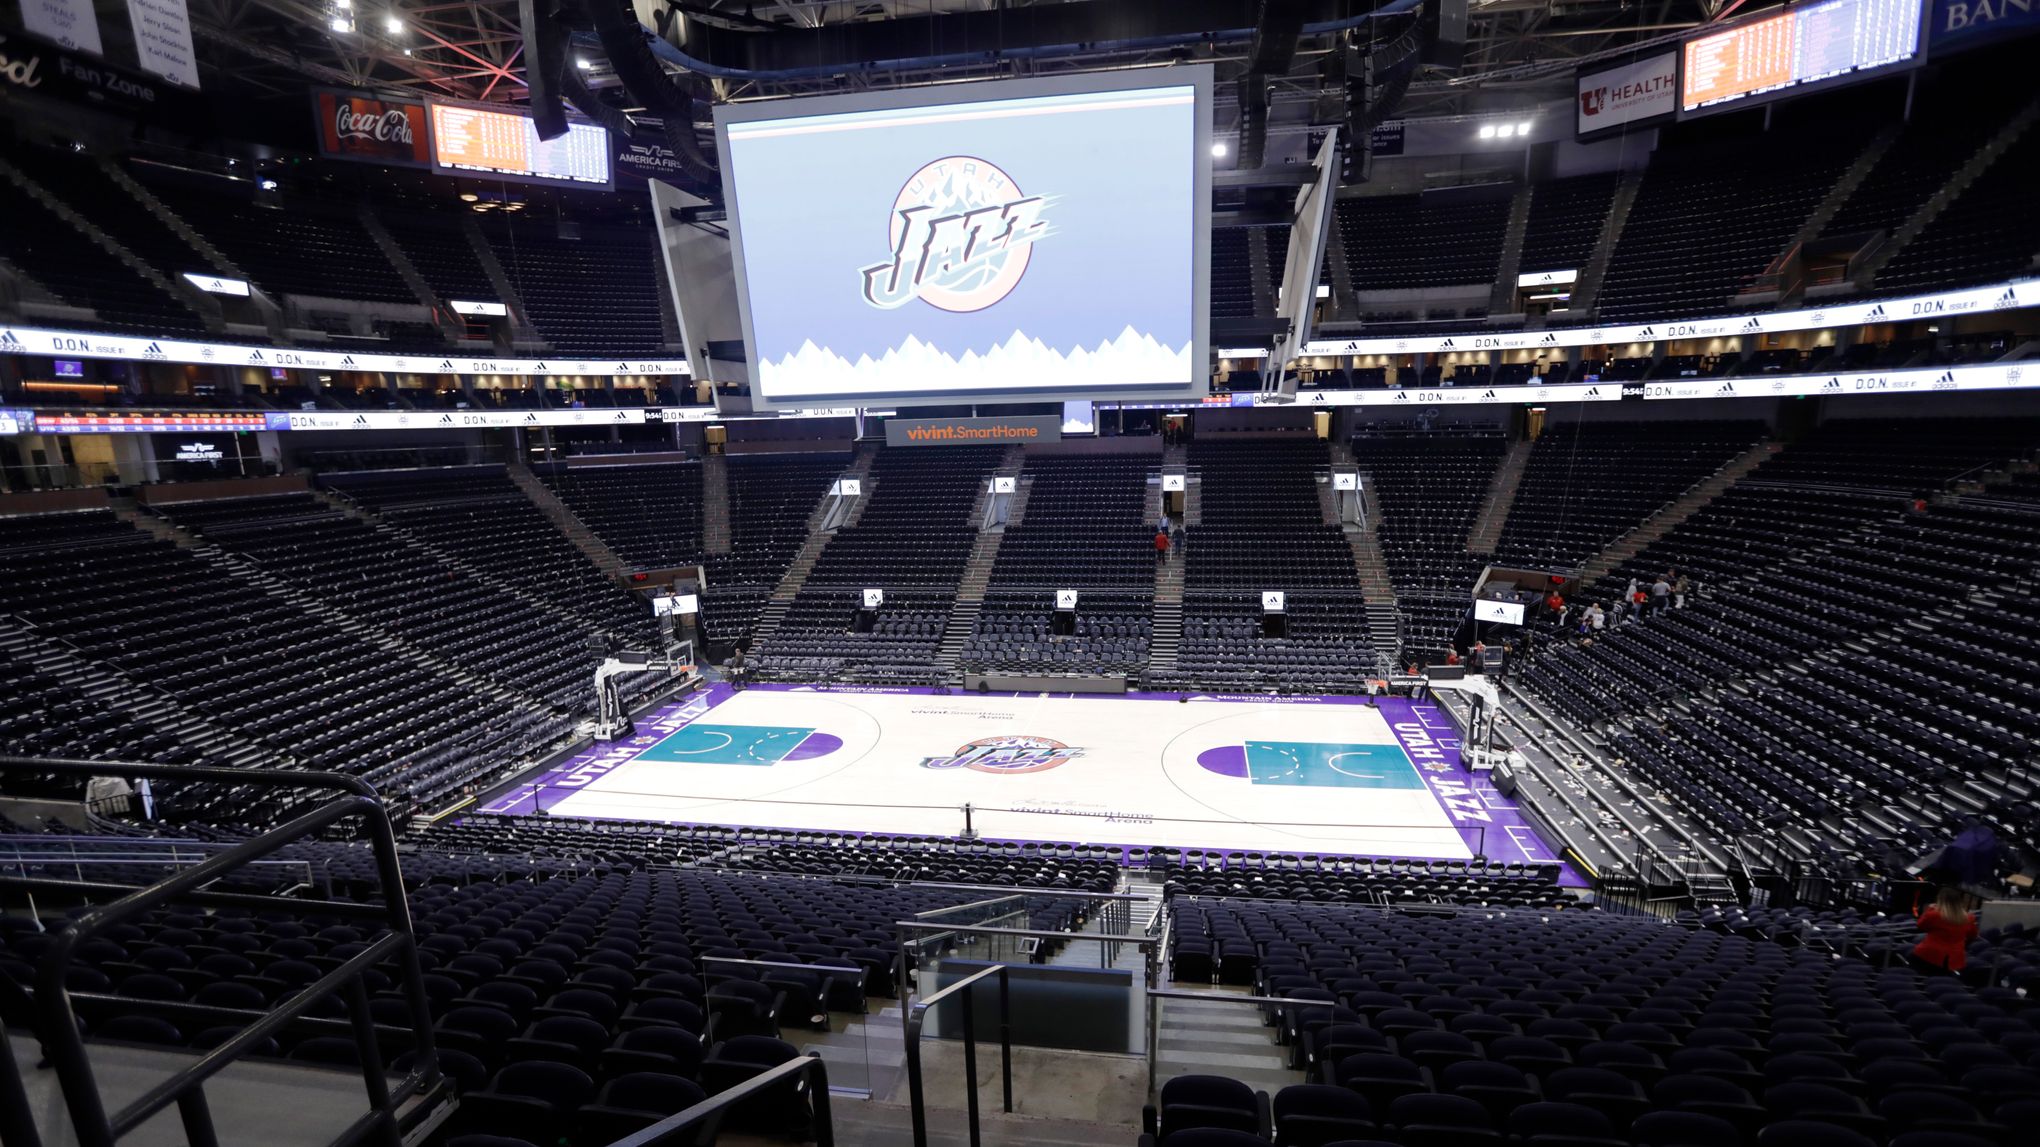 Utah Jazz discussed plans for homeless resources during NBA All-Star Game